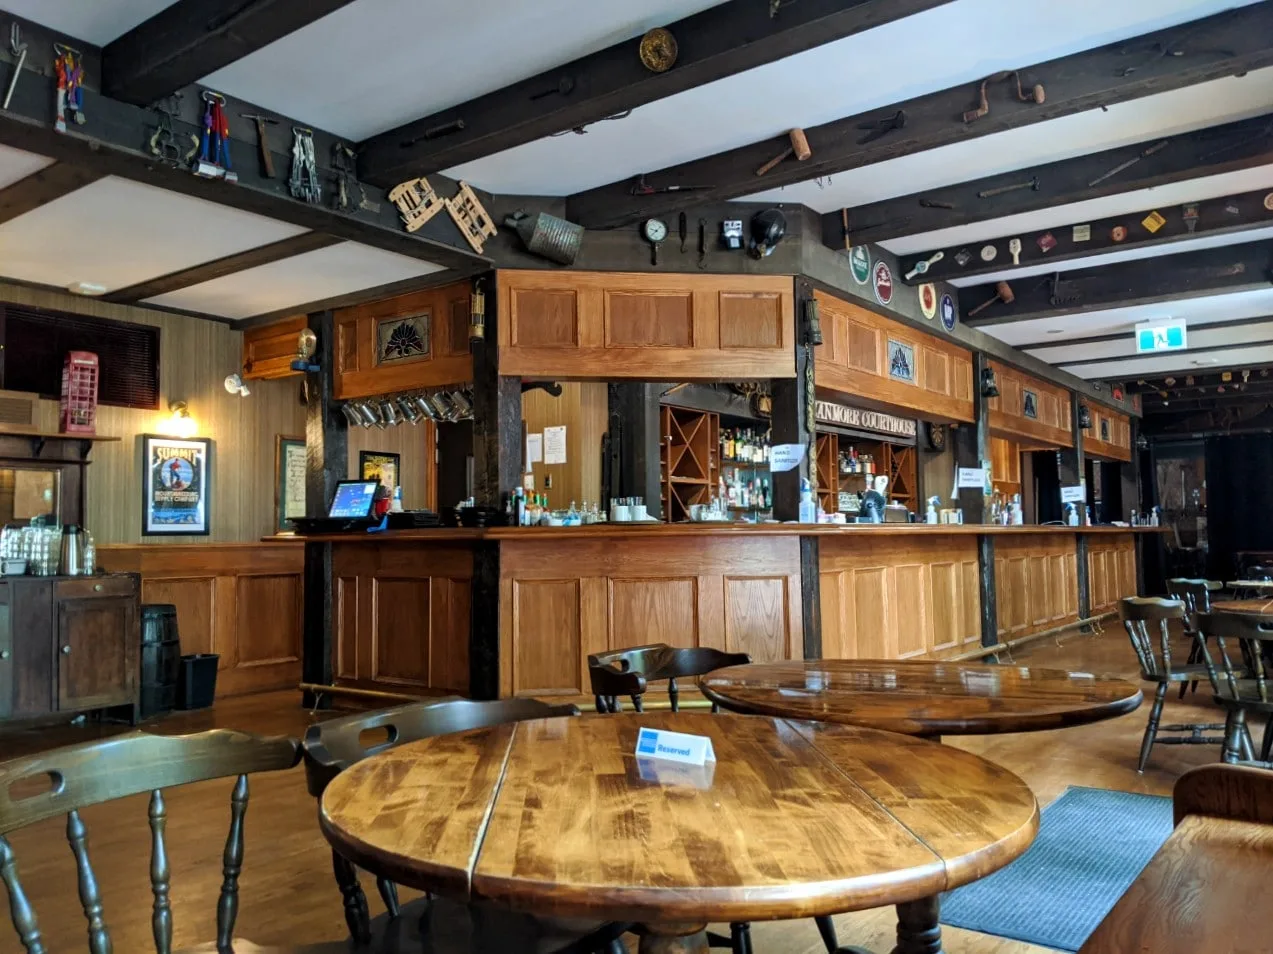 Inside the Miner's Lamp Pub, with English country pub style decor (wooden beams, wooden tables, paneled bar)